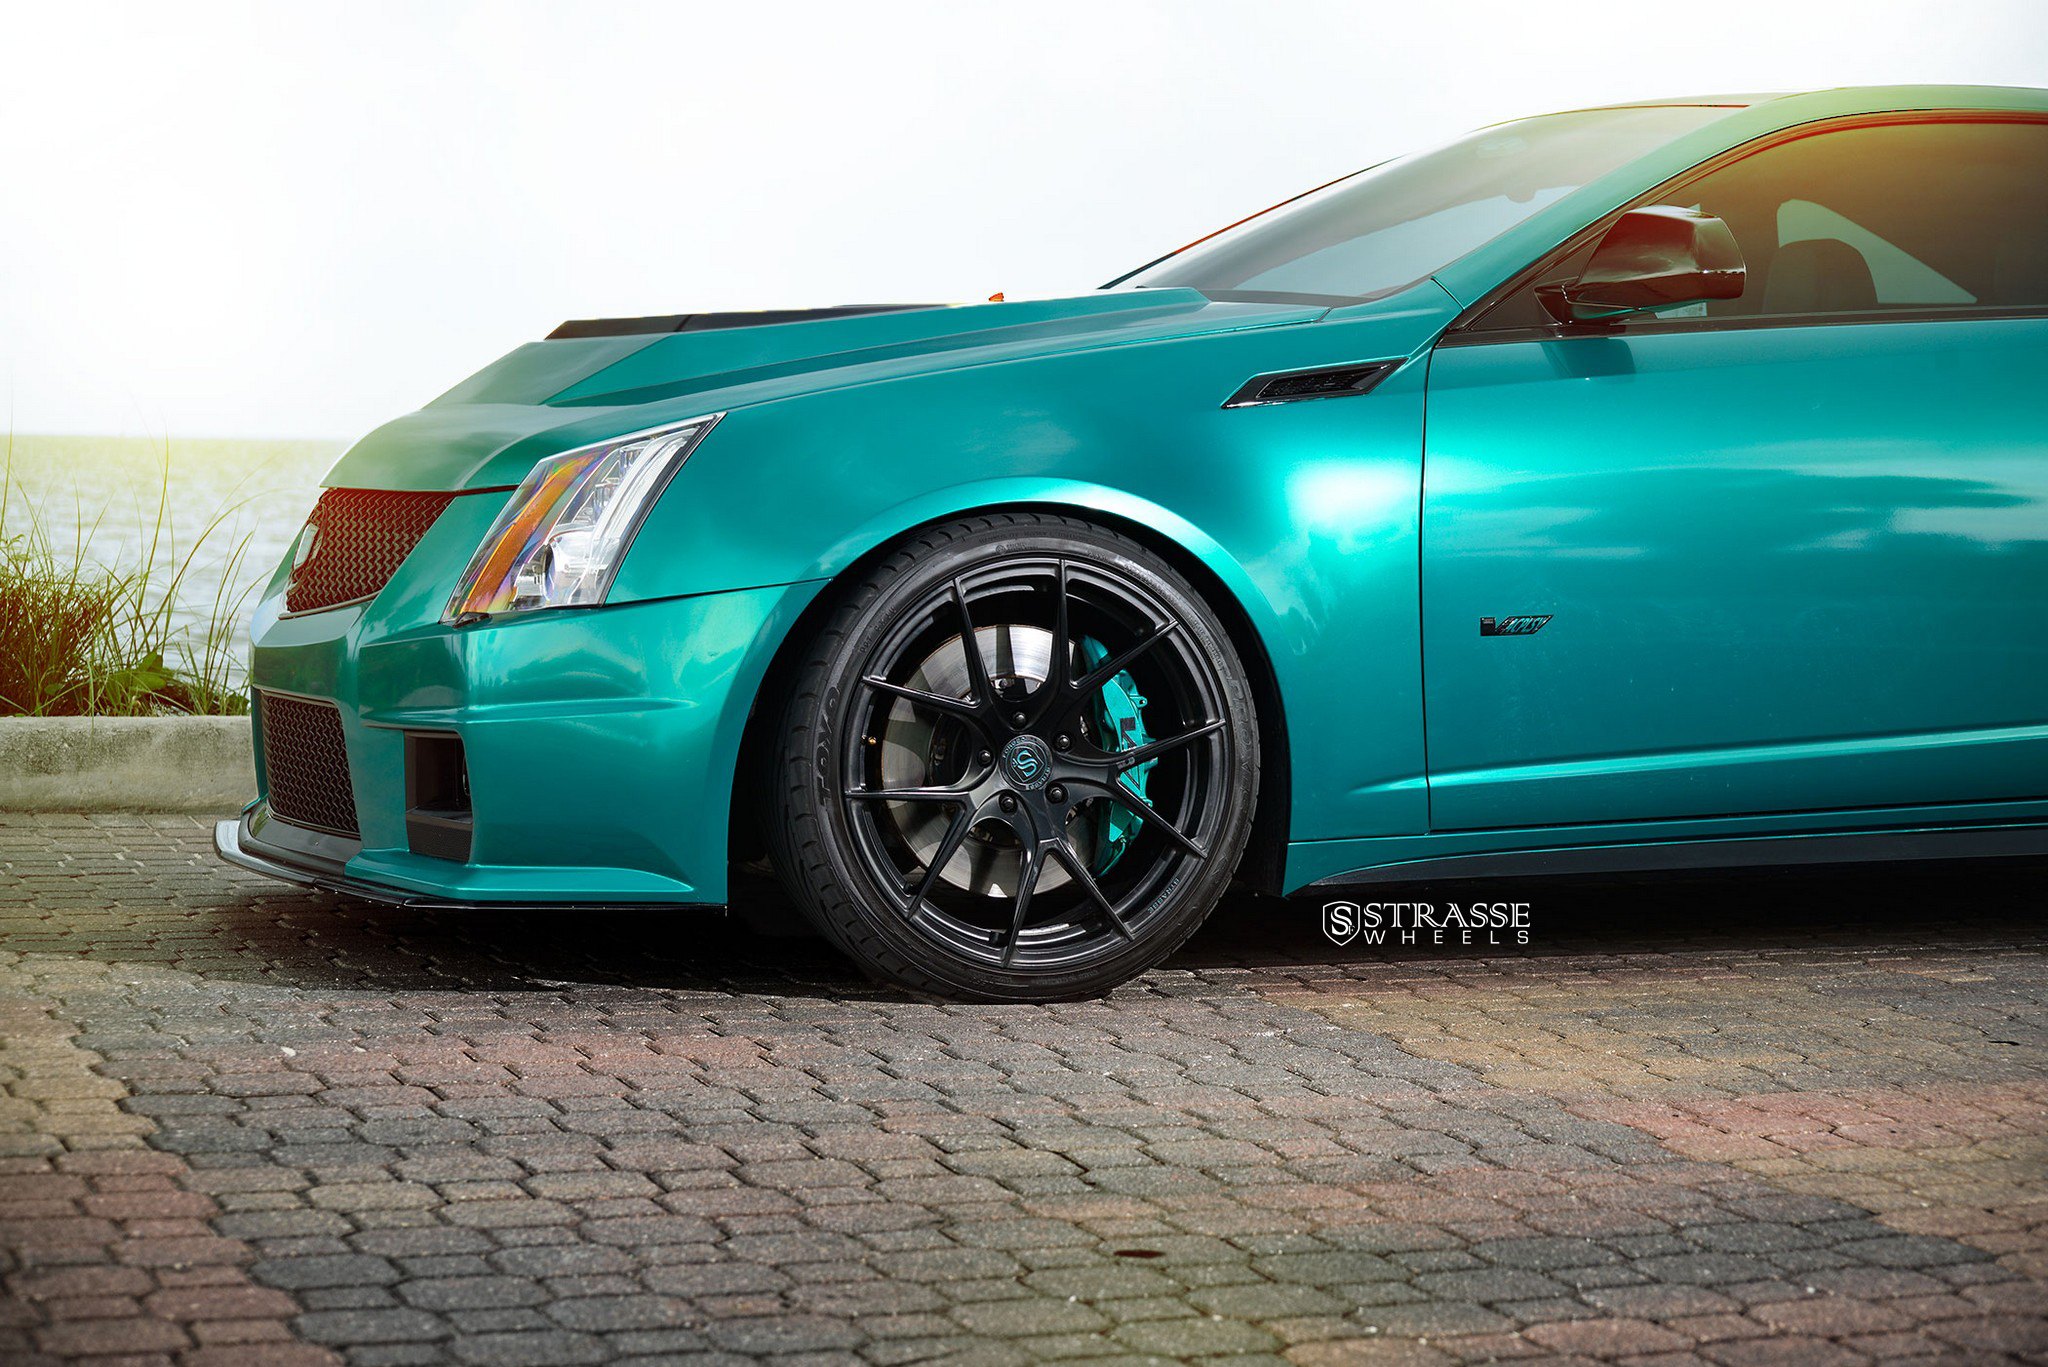 Toyo Tires on Custom Green Cadillac CTS - Photo by Strasse Forged